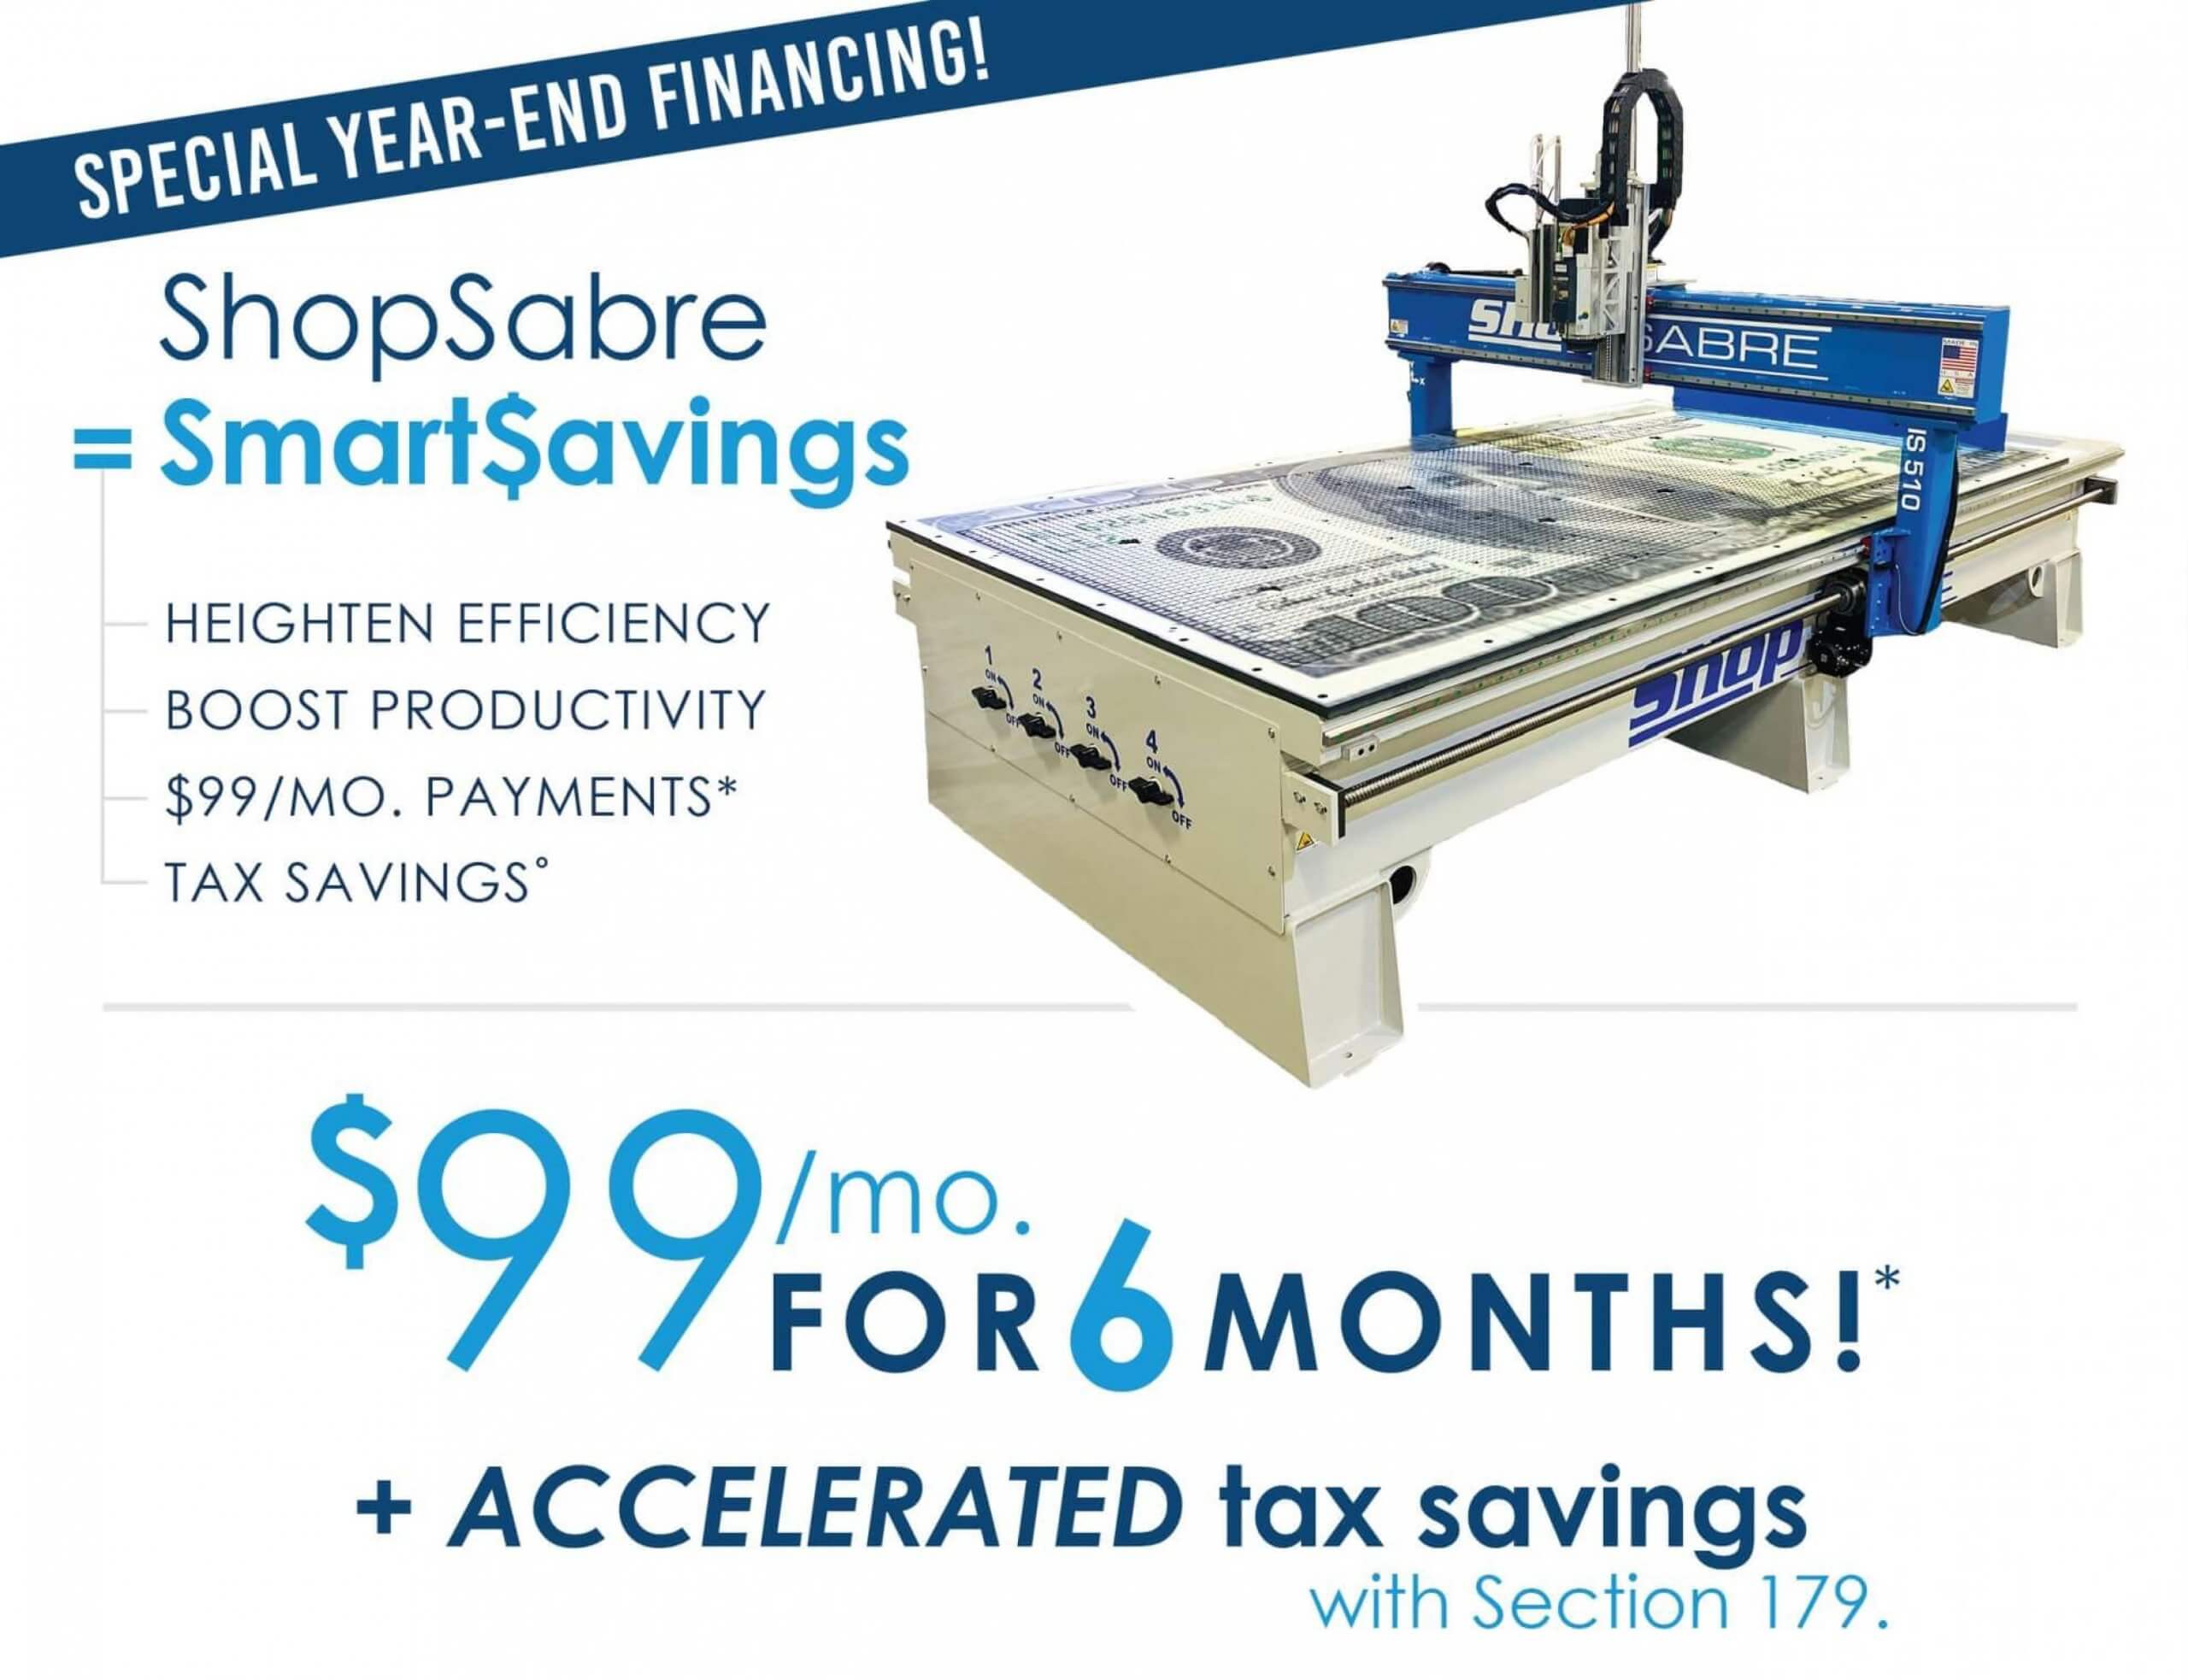 shopsabre year-end financing flyer